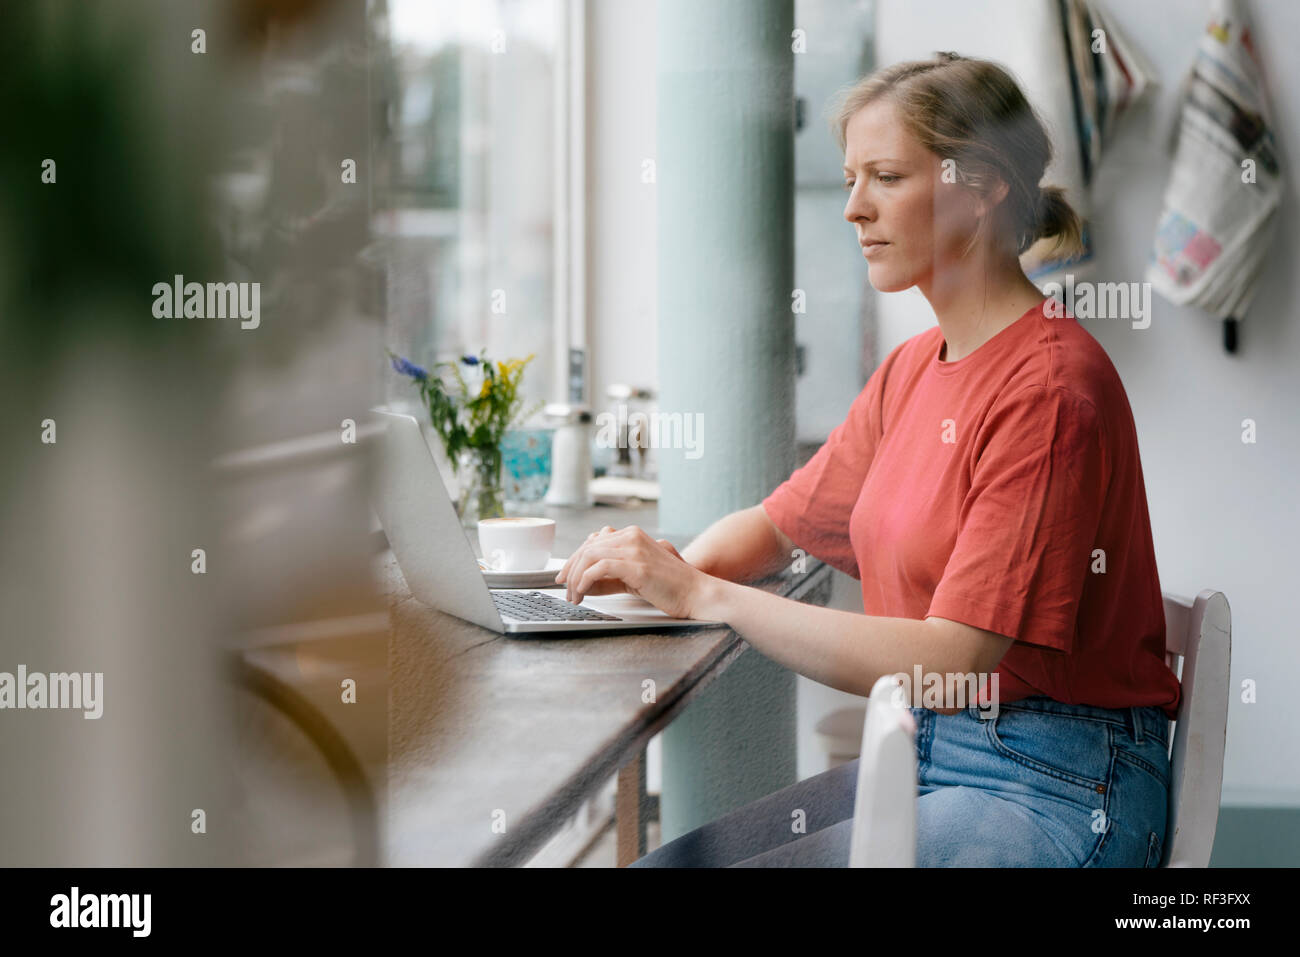 Young woman using laptop at the window in a cafe Stock Photo